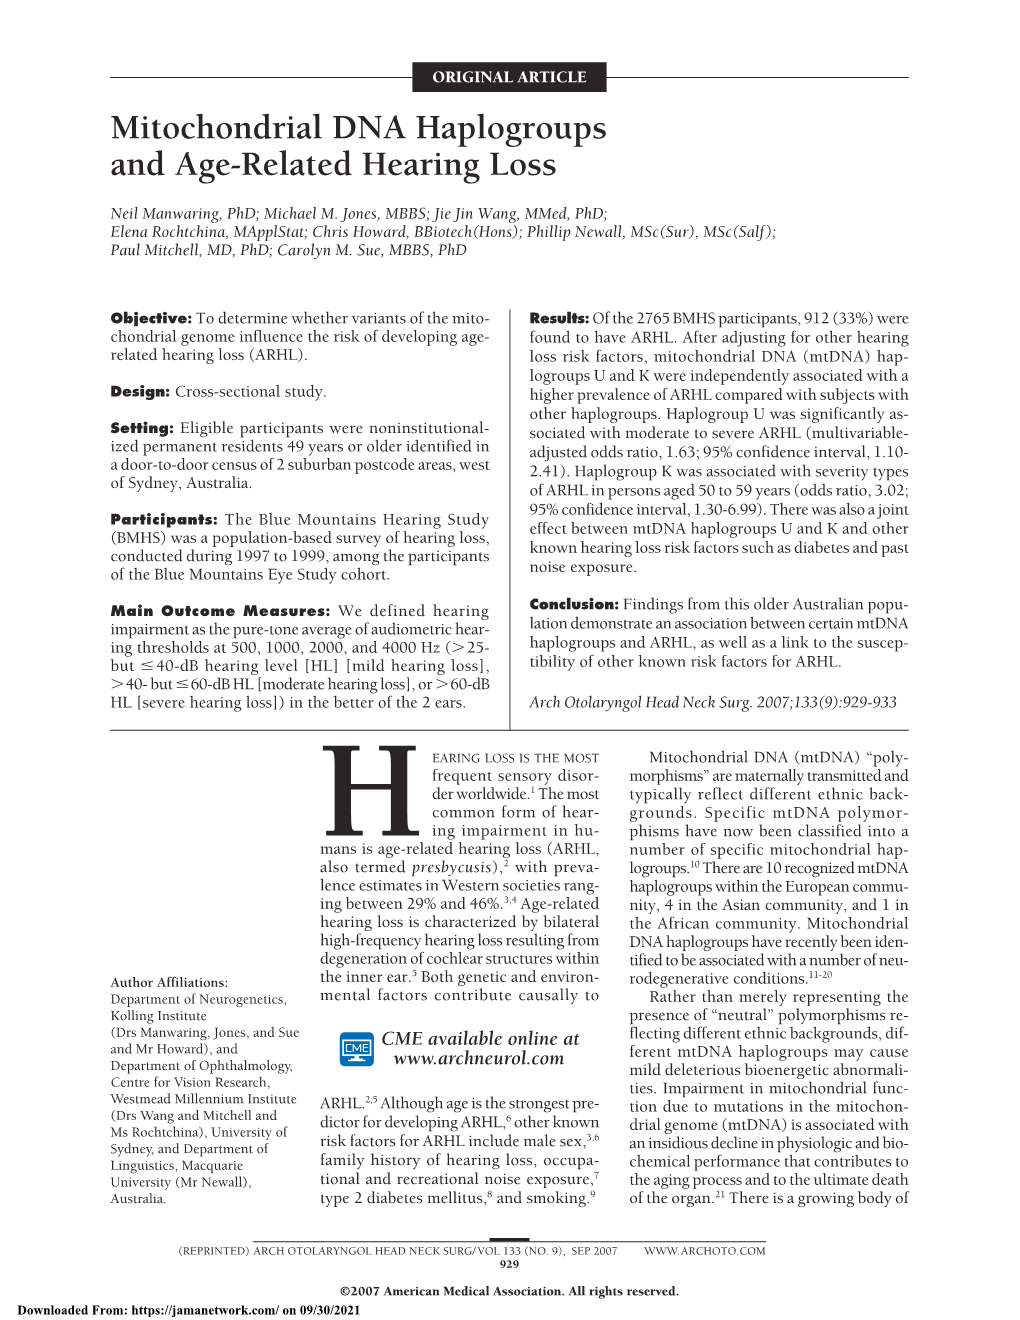 Mitochondrial DNA Haplogroups and Age-Related Hearing Loss